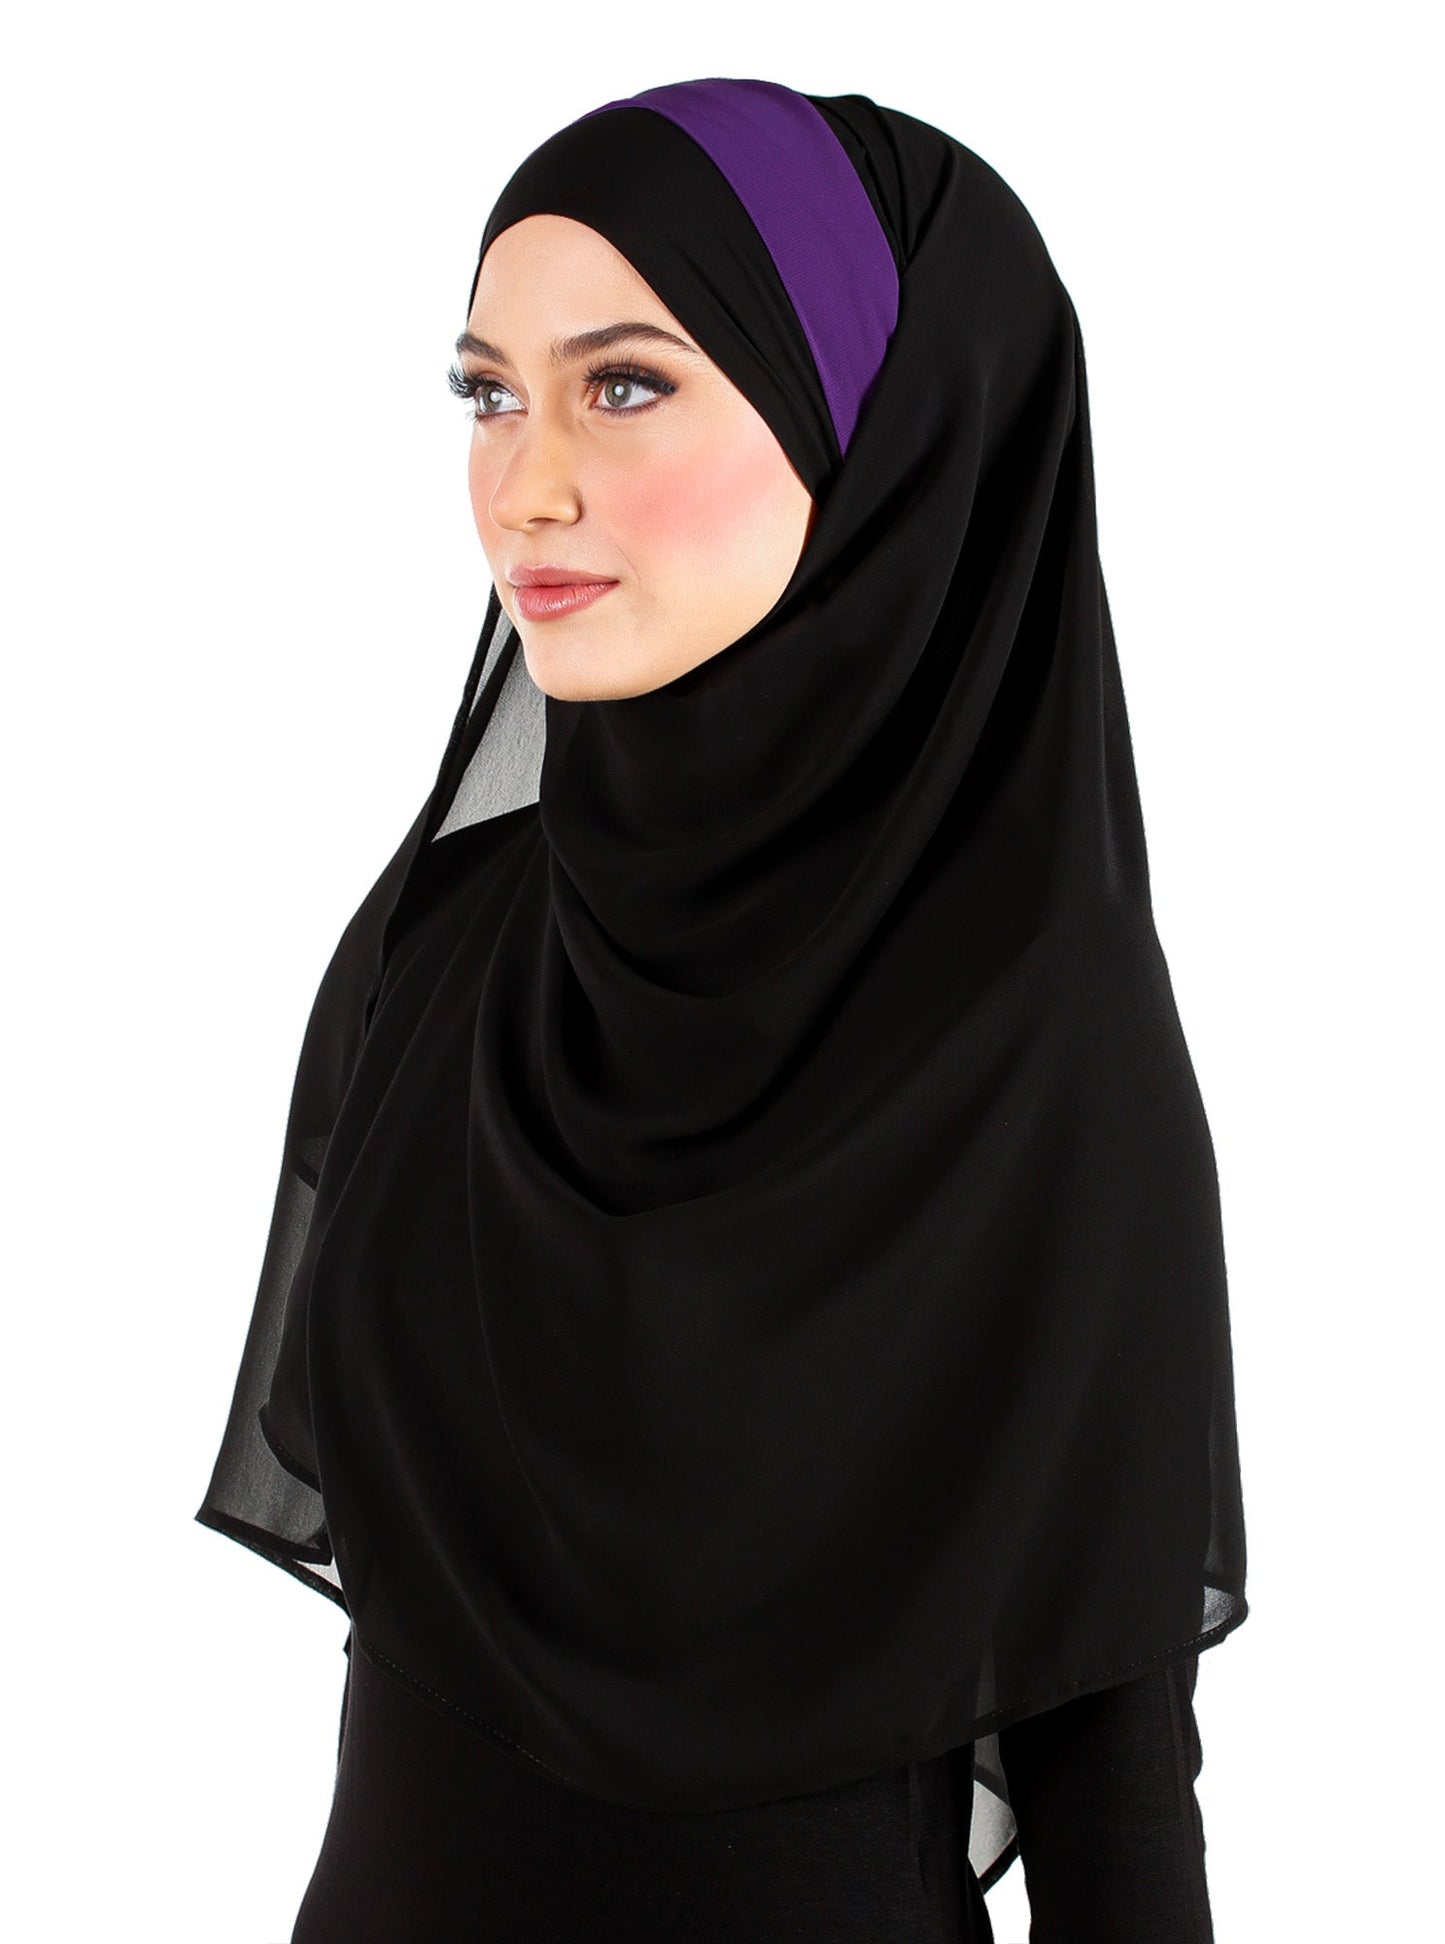 right hand view of Chiffon Wrap Hijab with caplet and sashes that tie back to secure hijab black with purple accent on the caplet